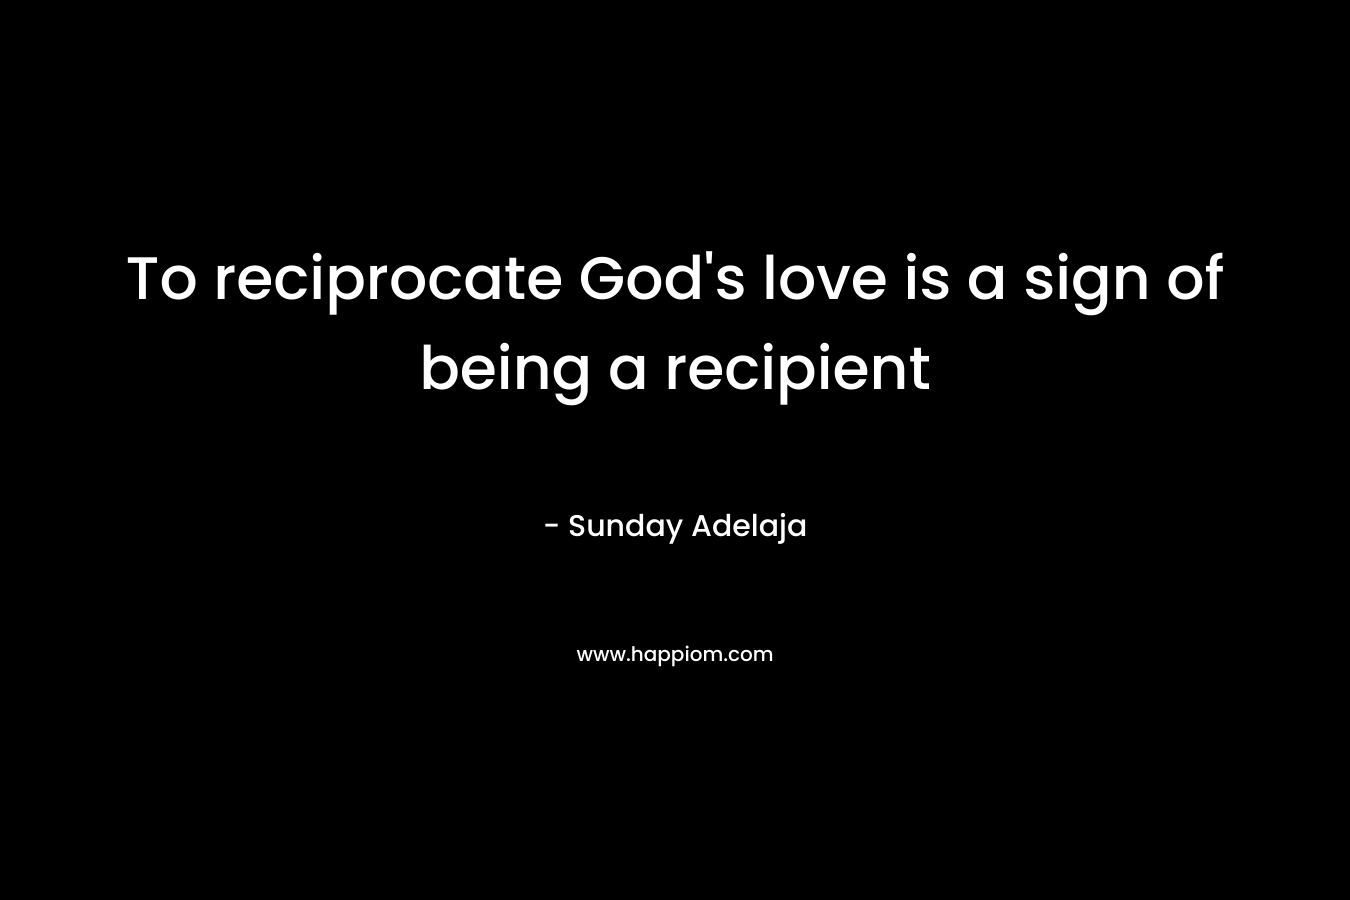 To reciprocate God's love is a sign of being a recipient